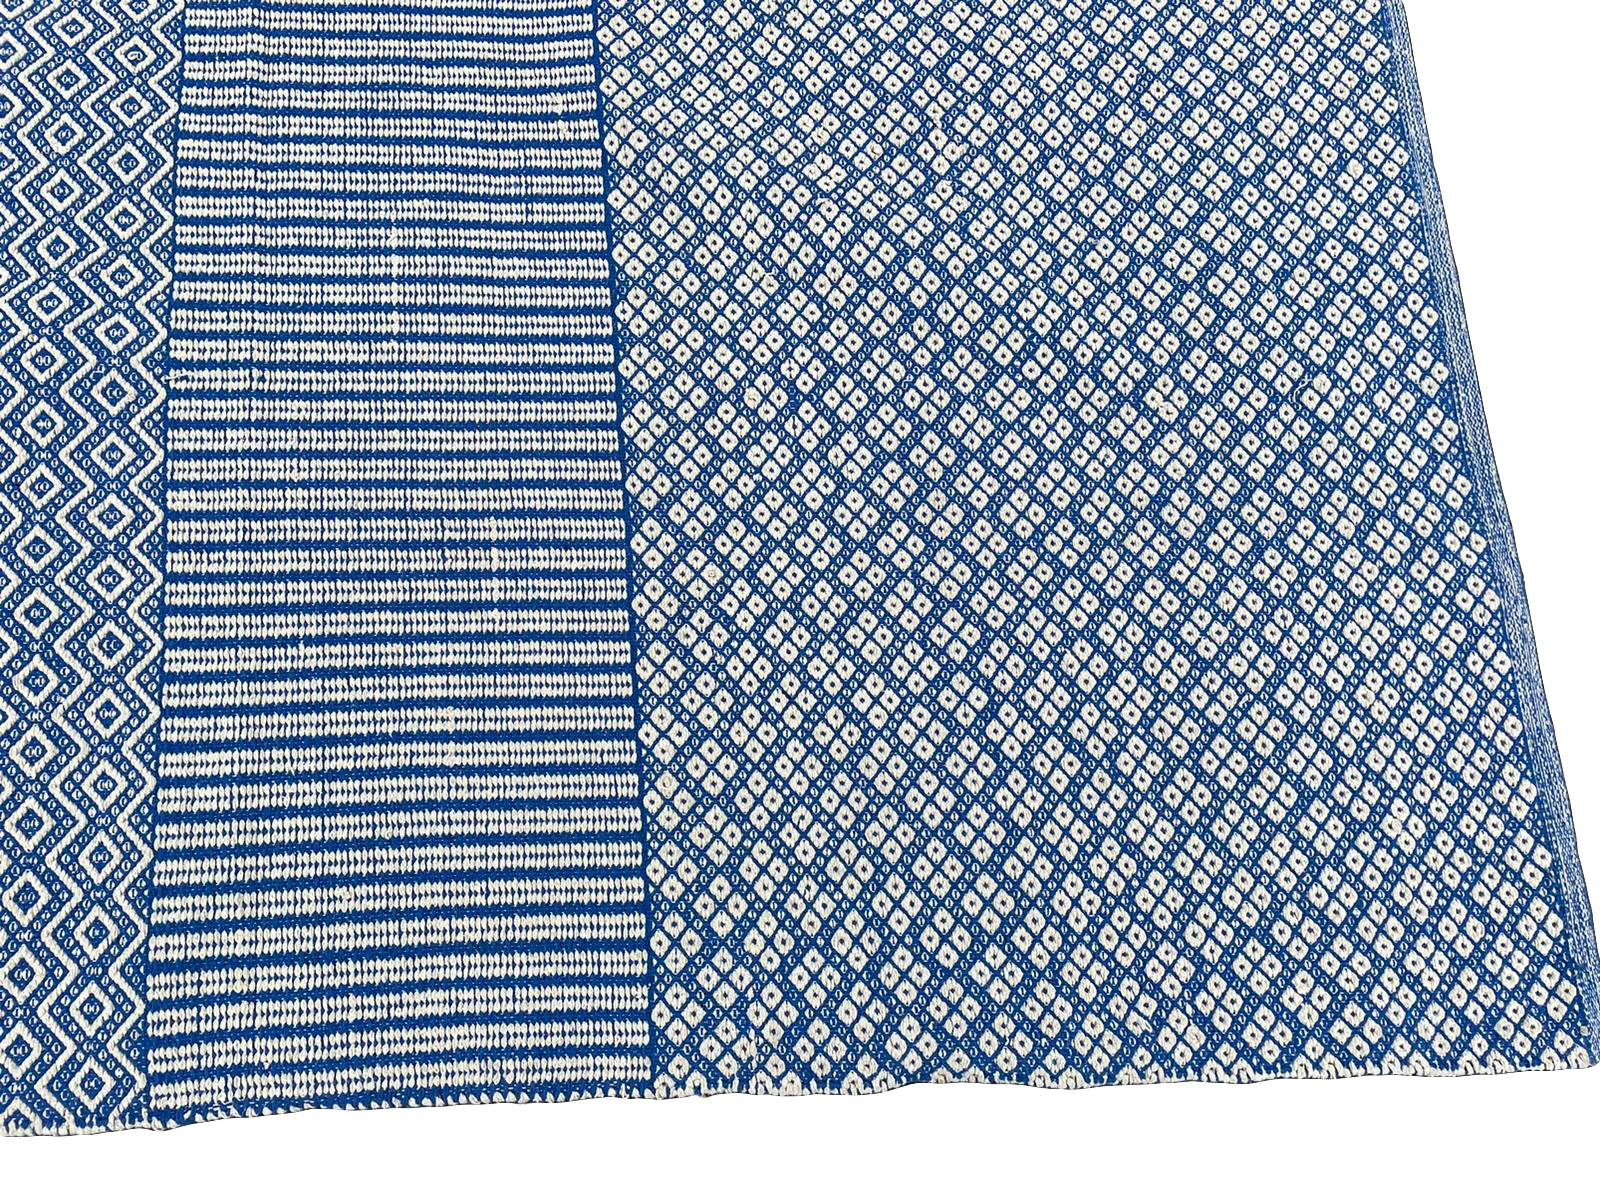 Oversized Blue and White Flat-Weave Indian Kilim by Gordian Rugs 9